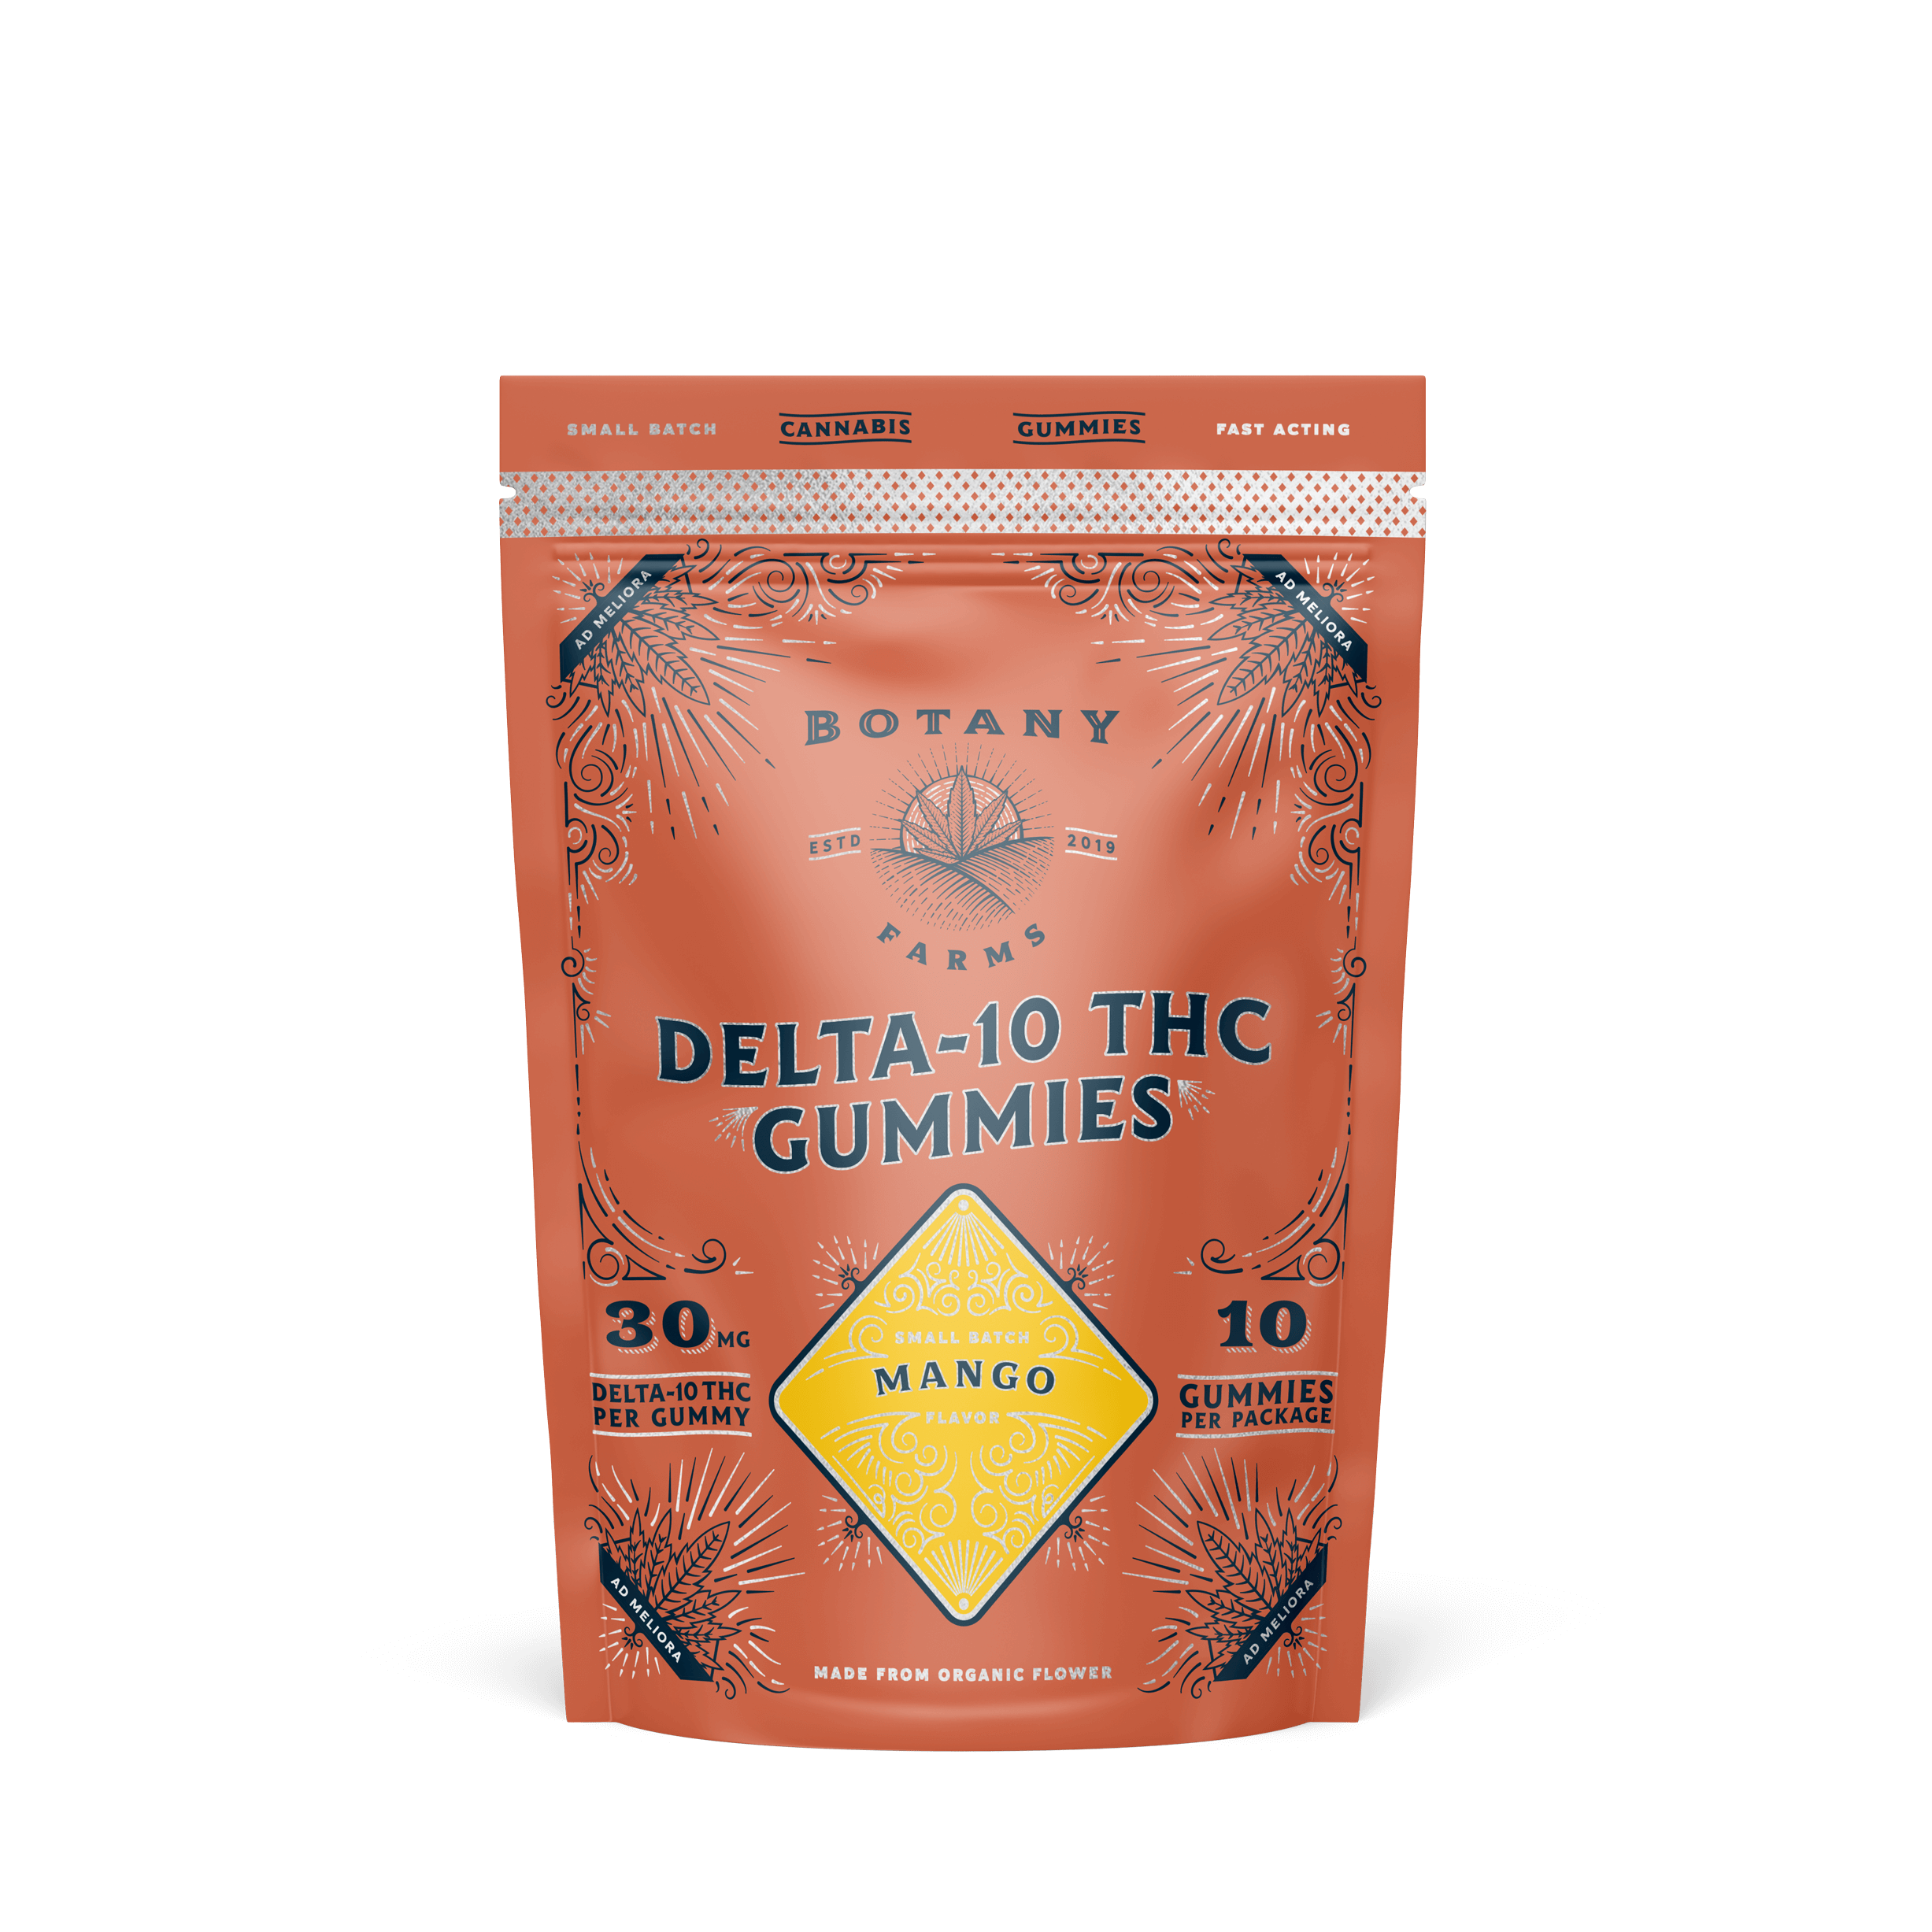 Pineapple Delta-10 THC Gummies: 10 Pack from Botany Farms